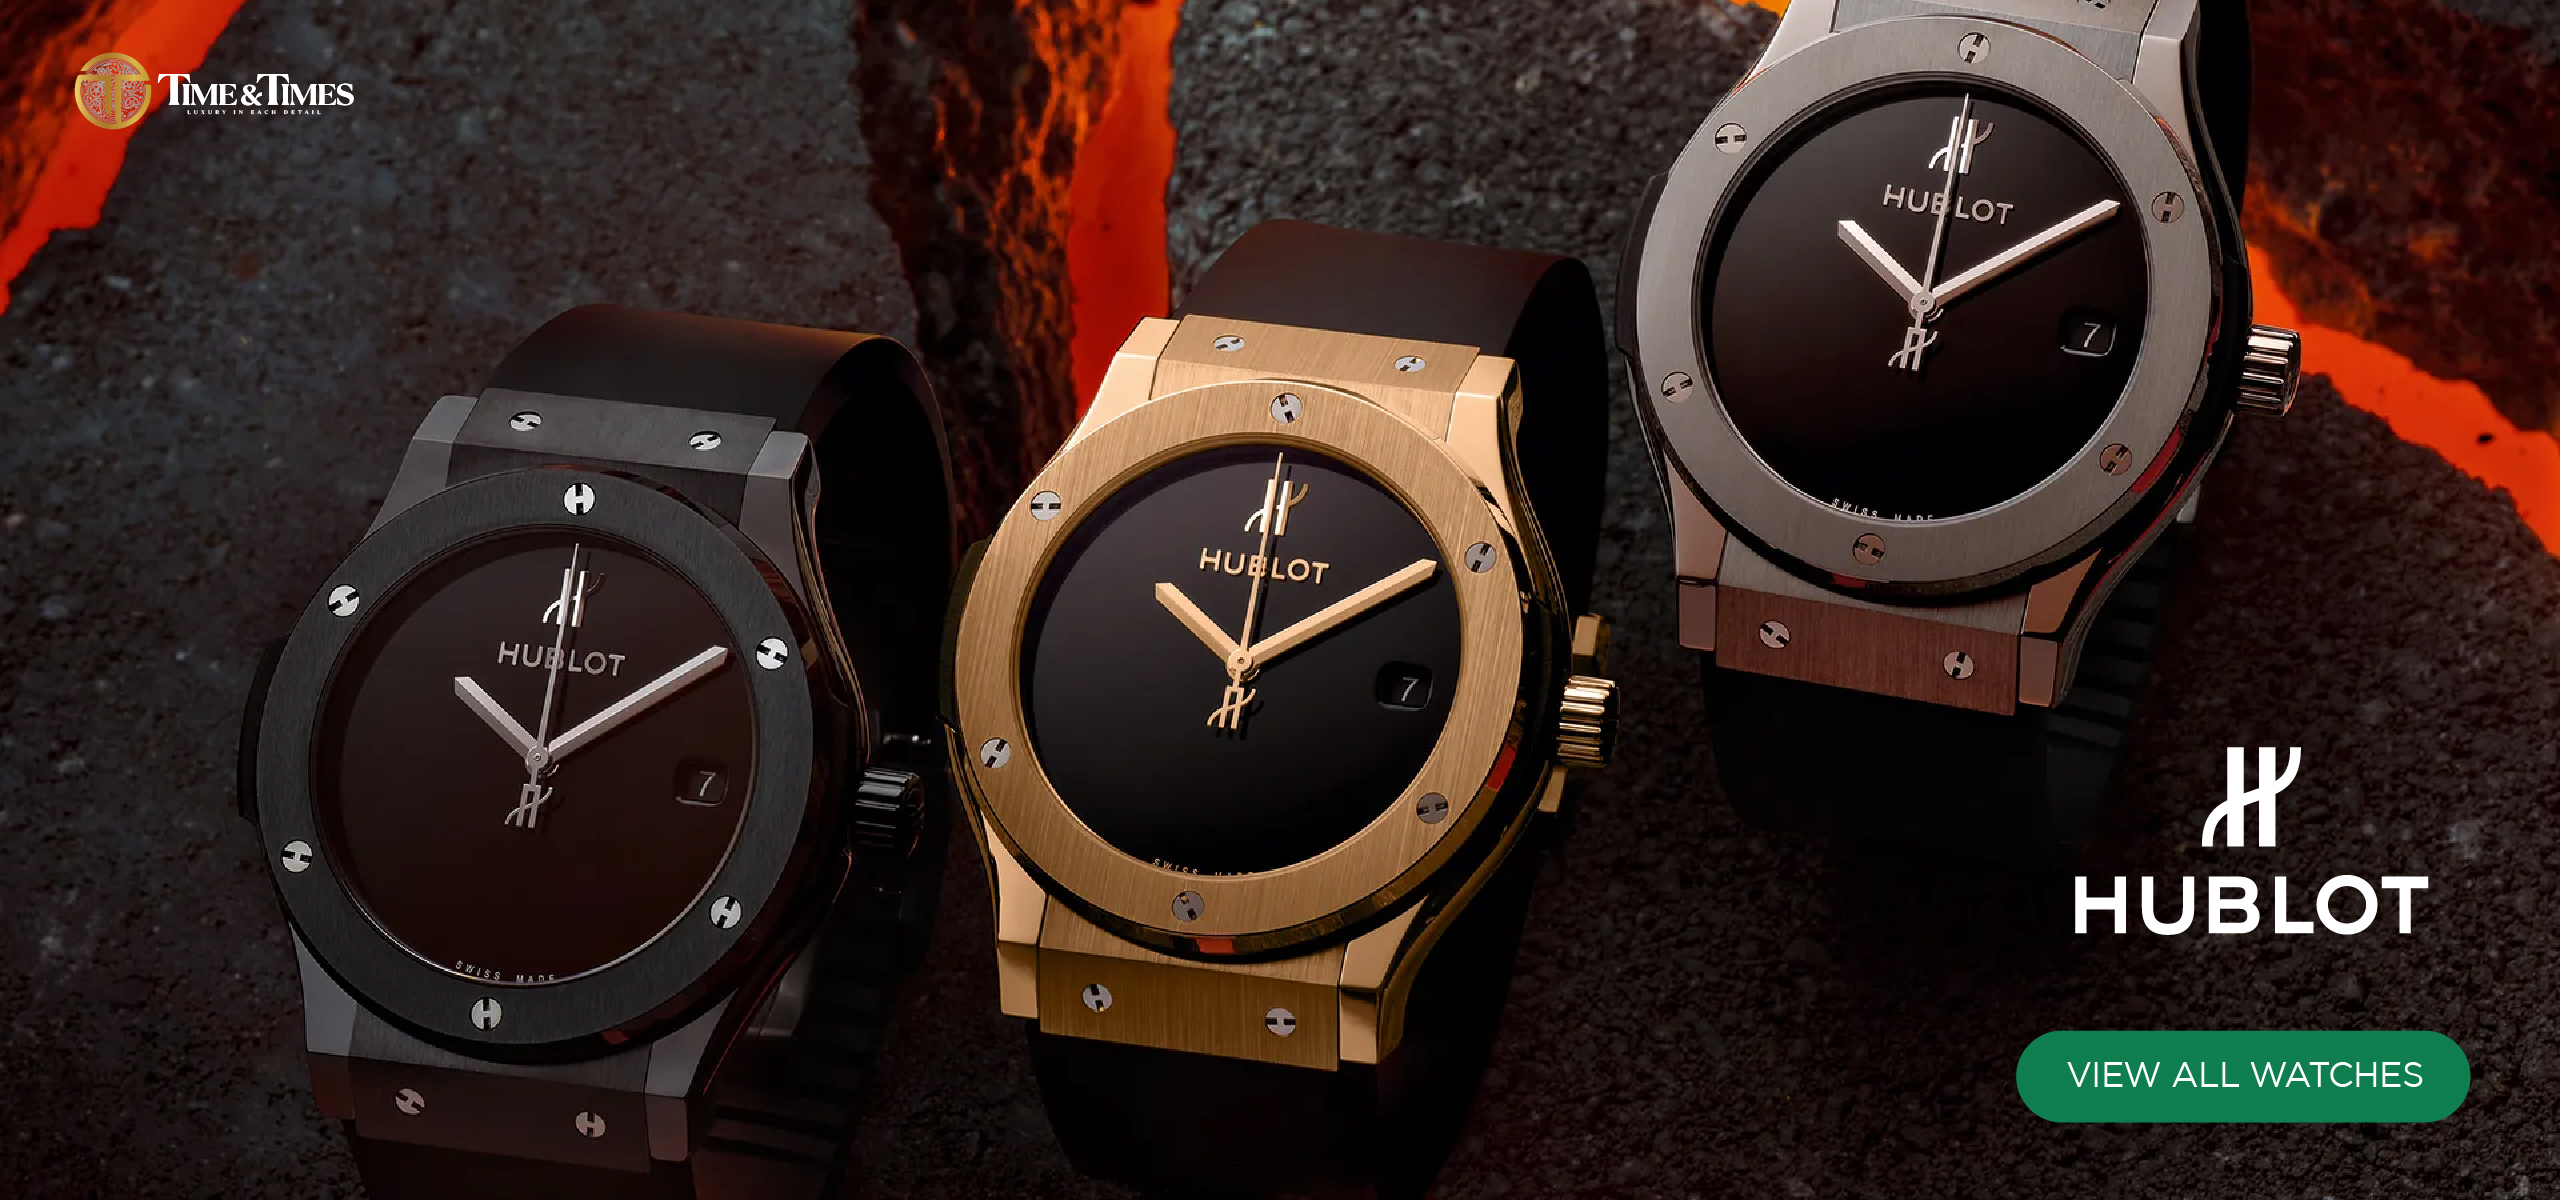 Time & Times Lux Empire - Hublot Collection